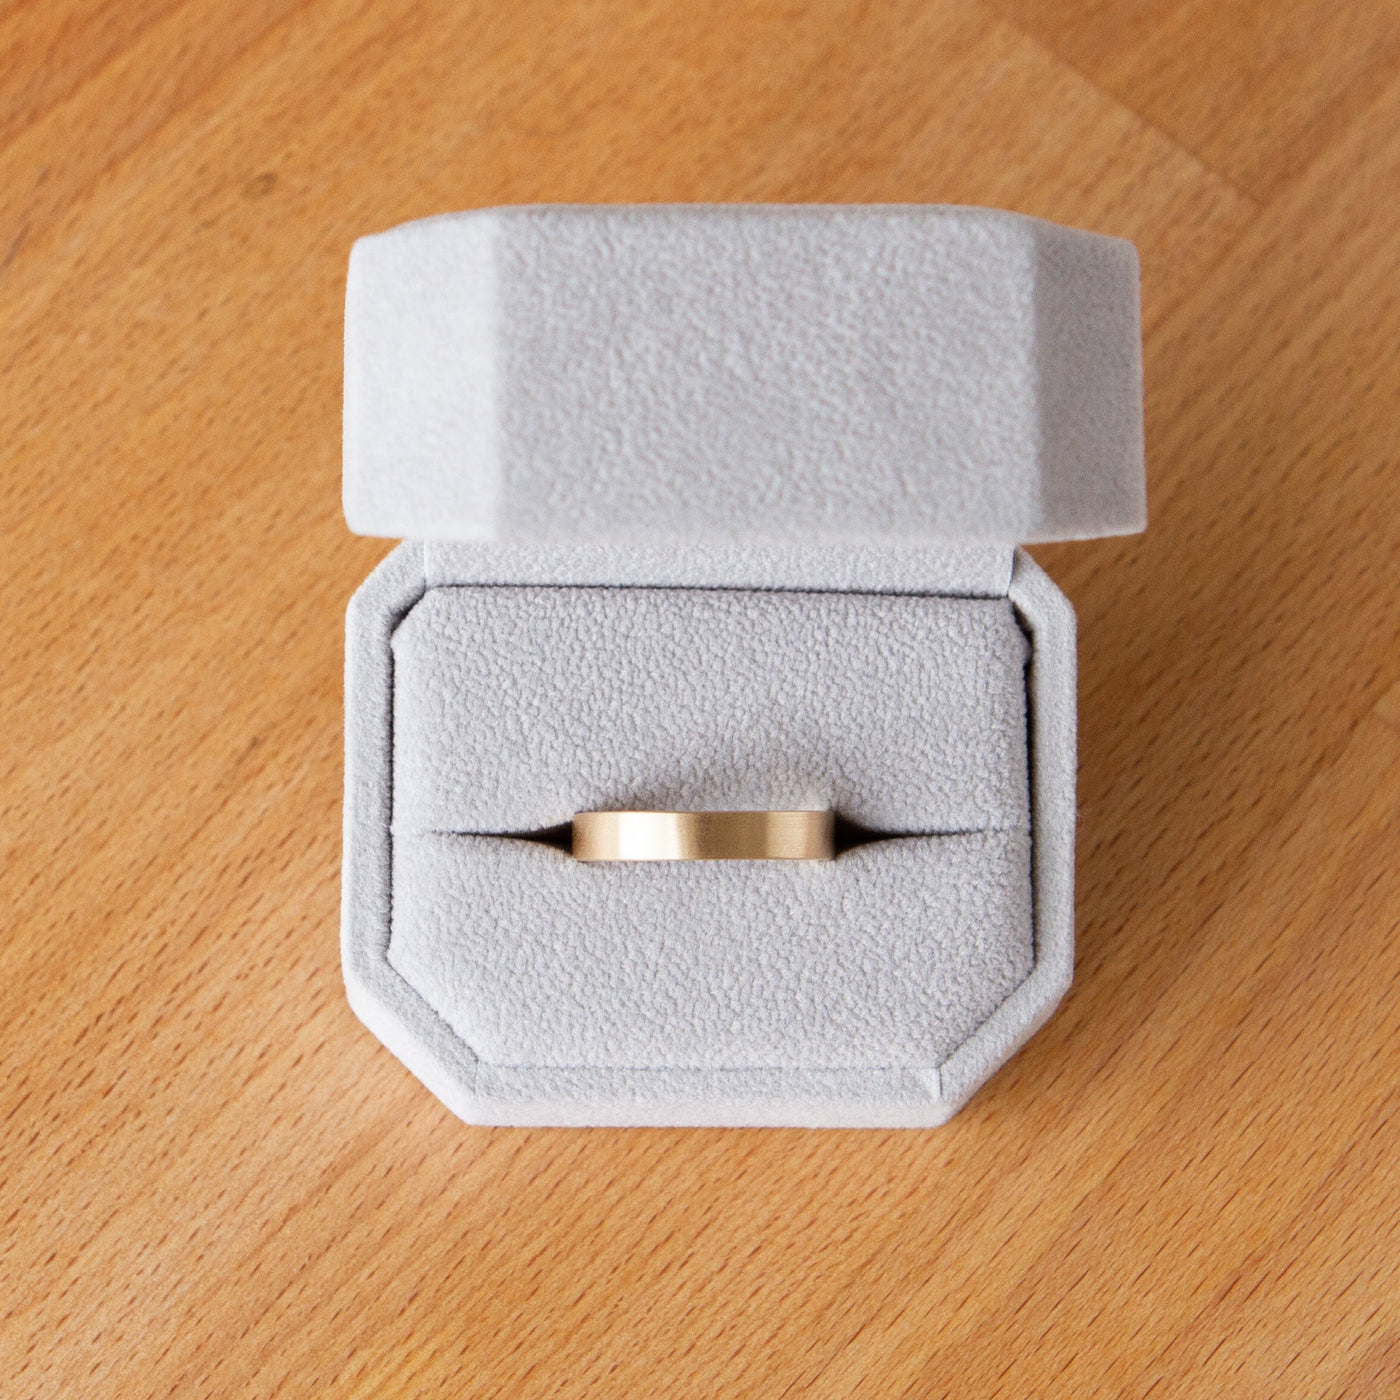 Wide Diablo flat brushed yellow gold wedding band in a ring box